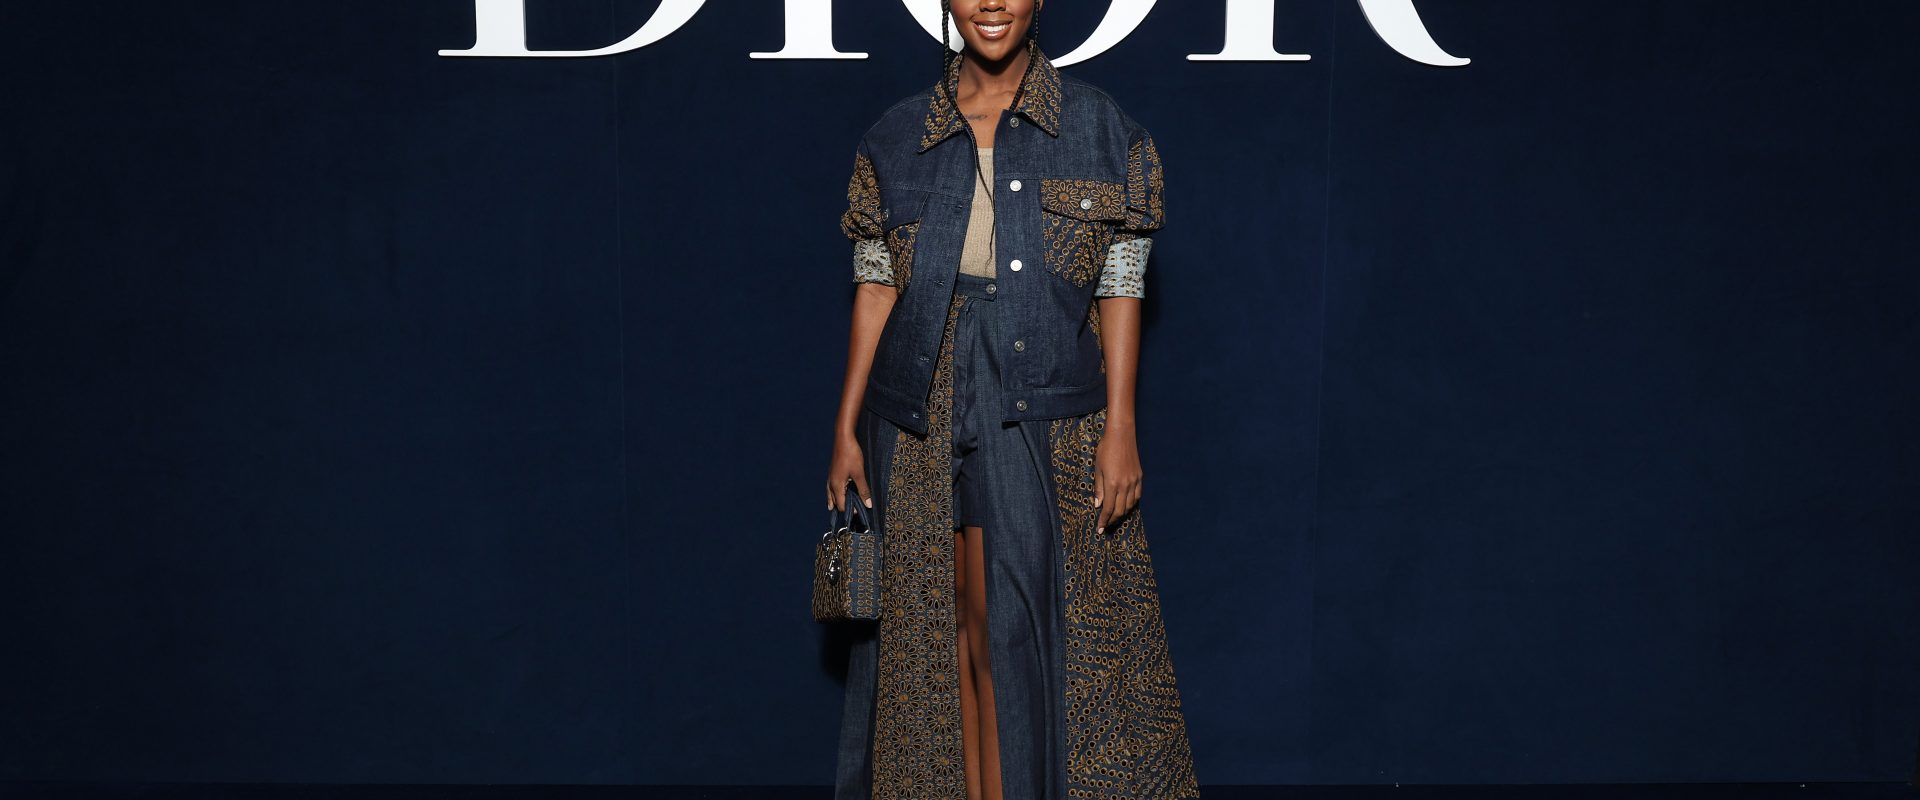 Thuso Mbedu in front of the Dior sign